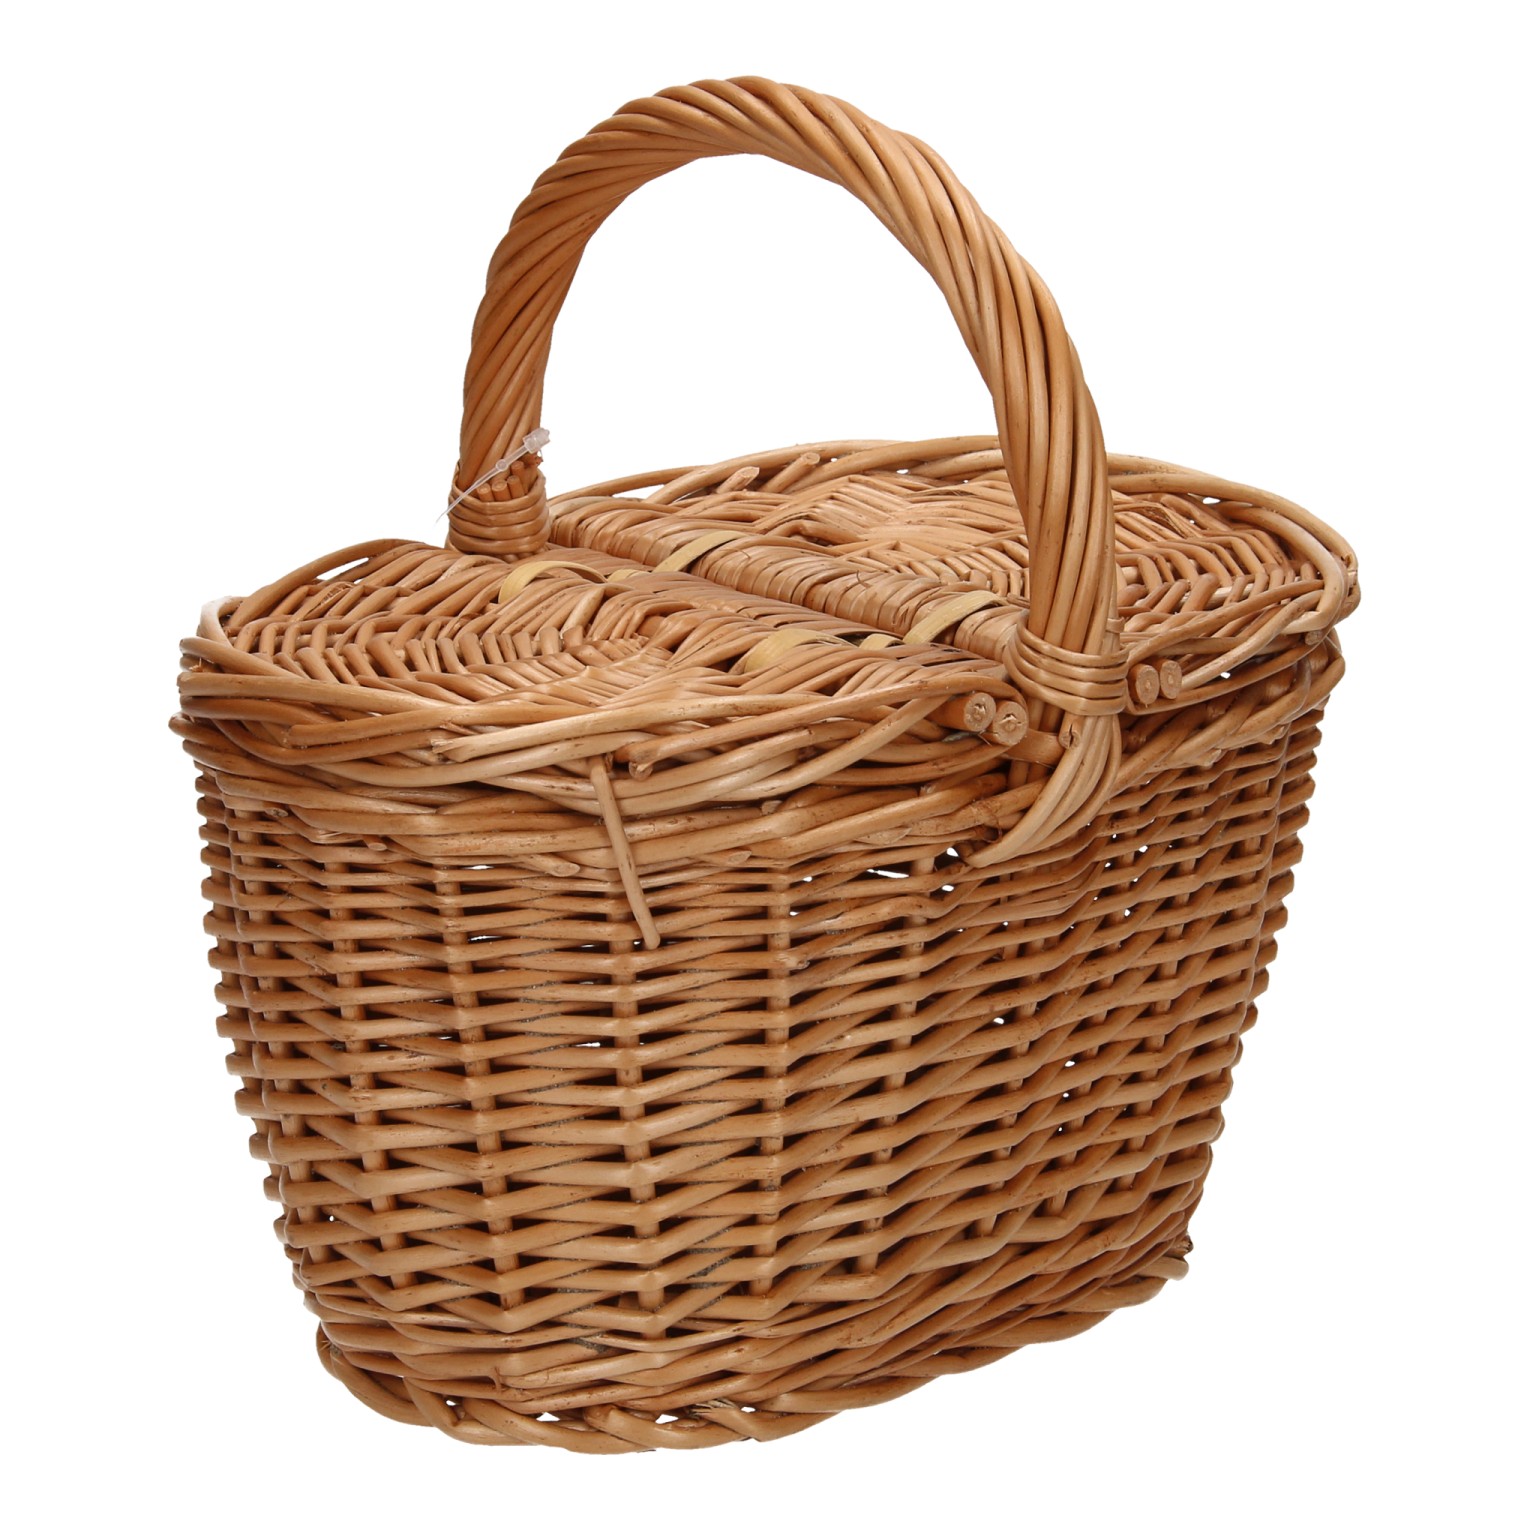 Wicker Picnic or Carrying Basket | Thimble